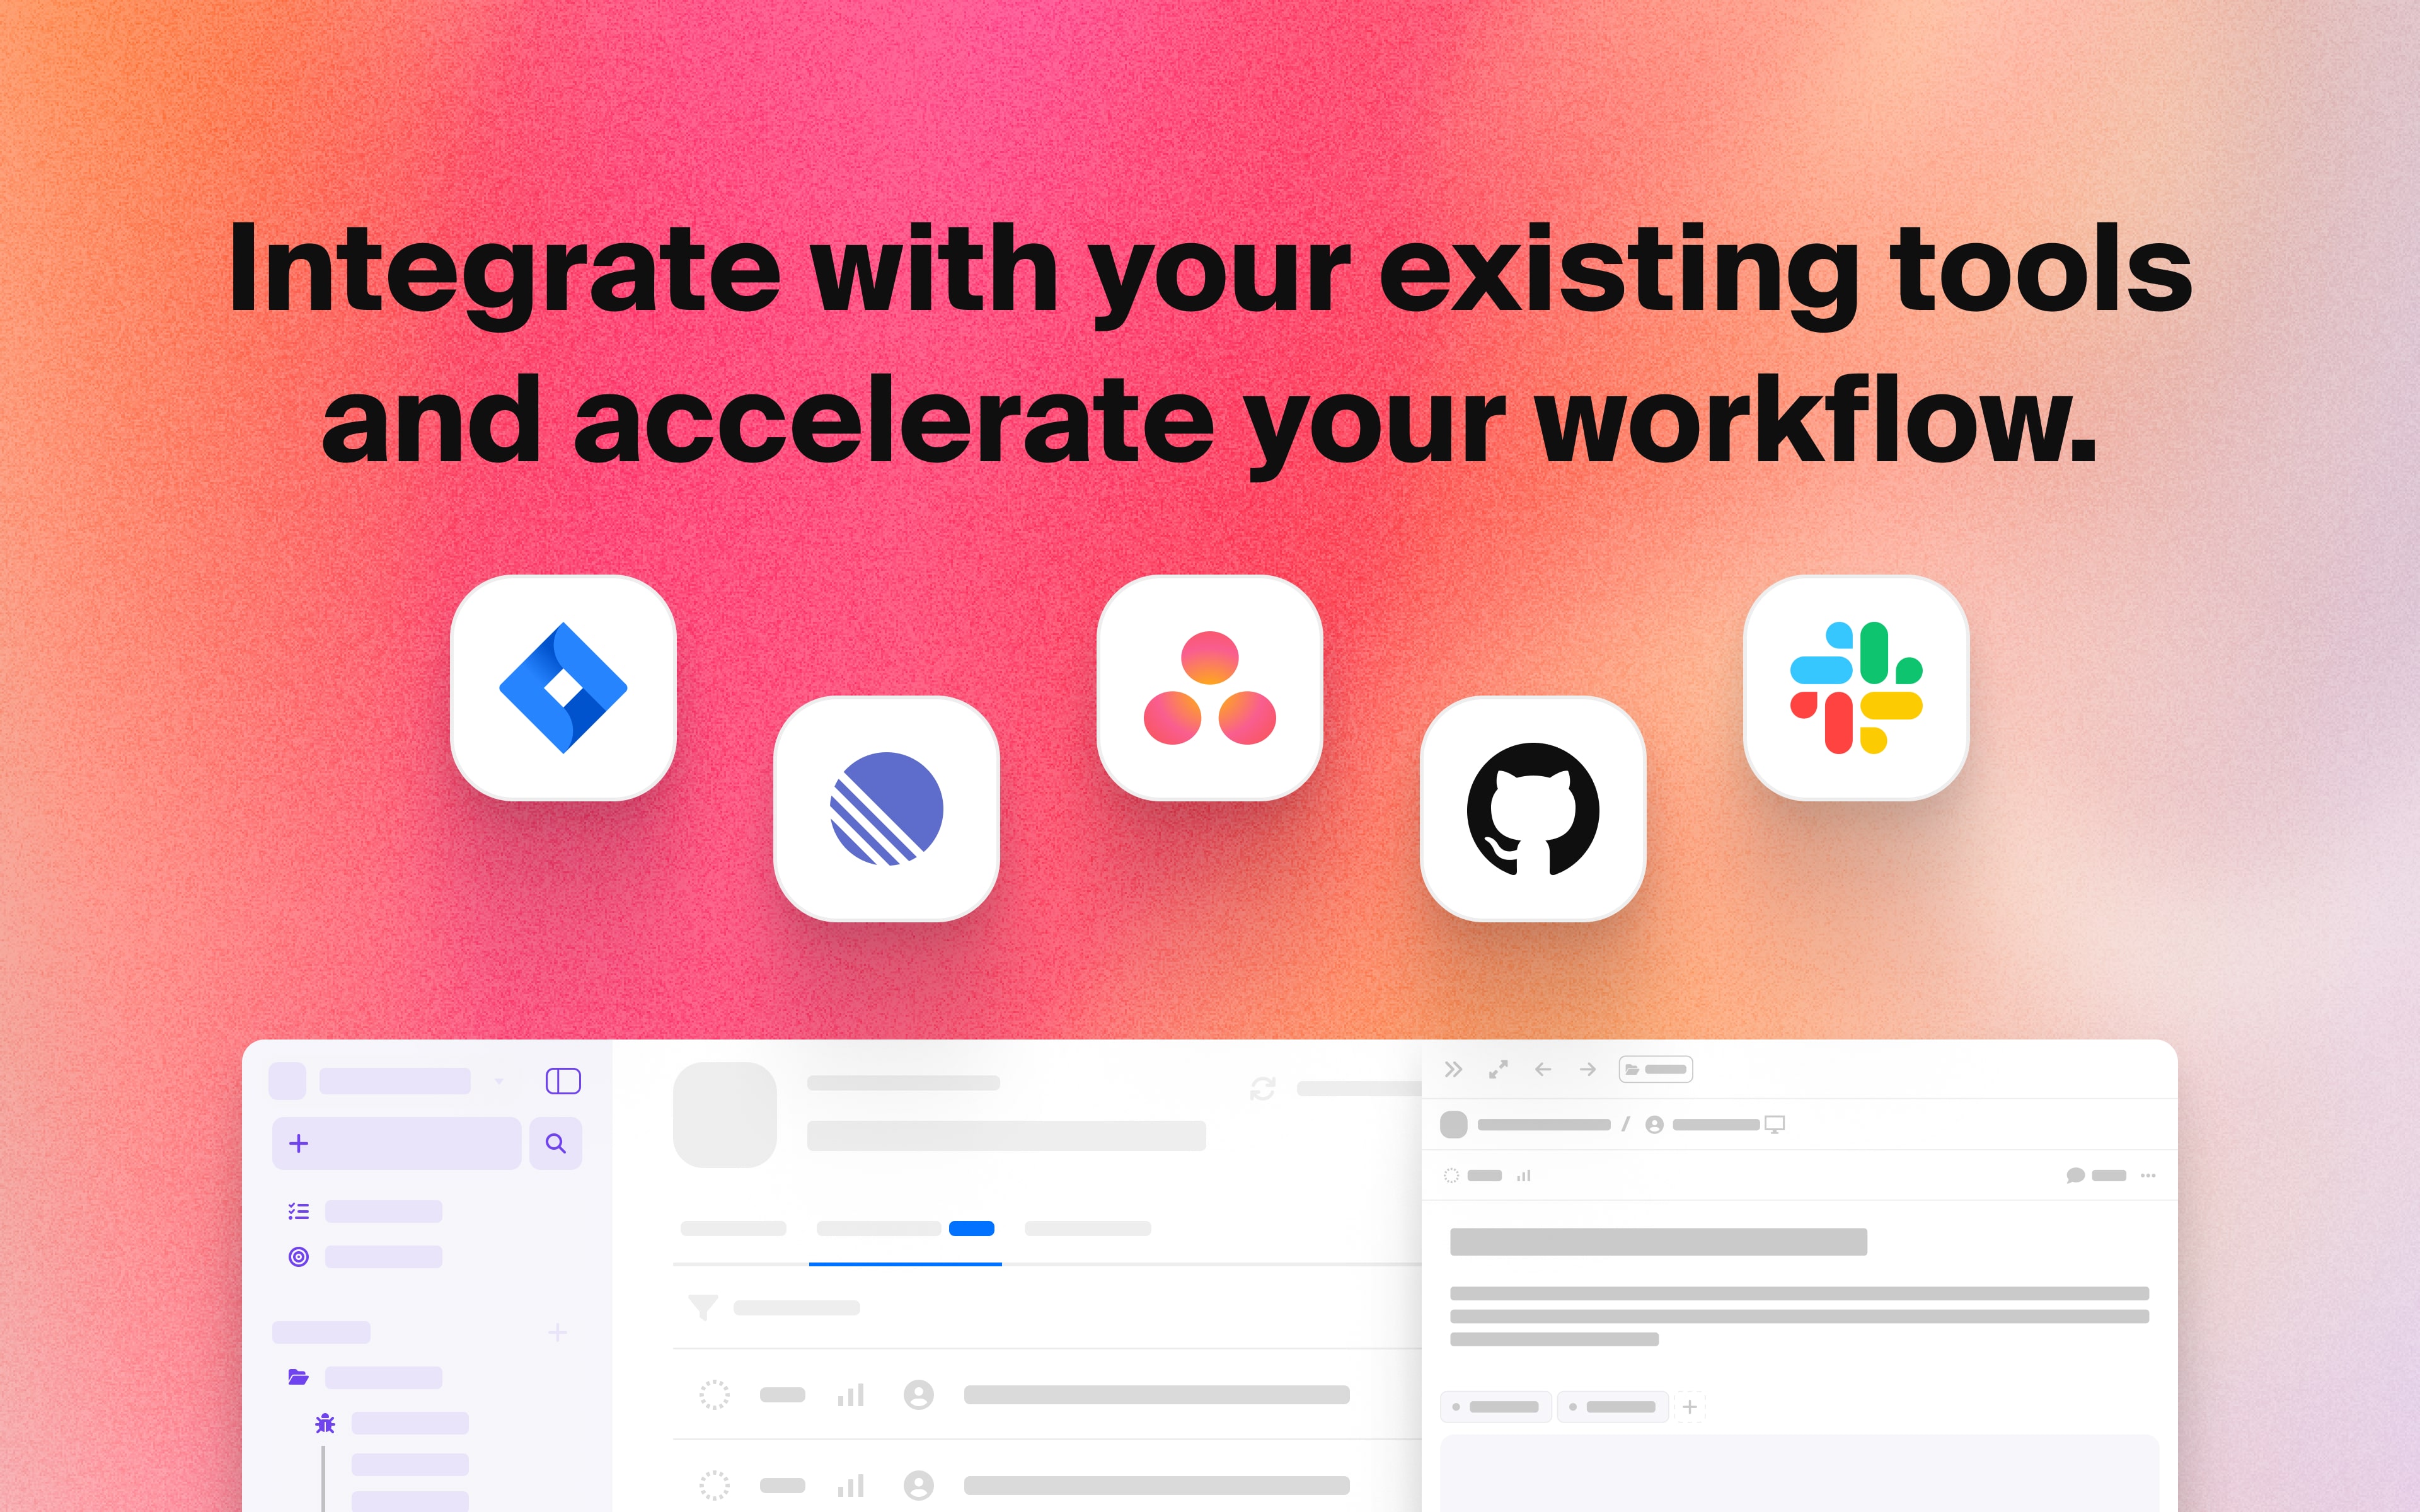 Integrate with your existing tools and accelerate your workflow.